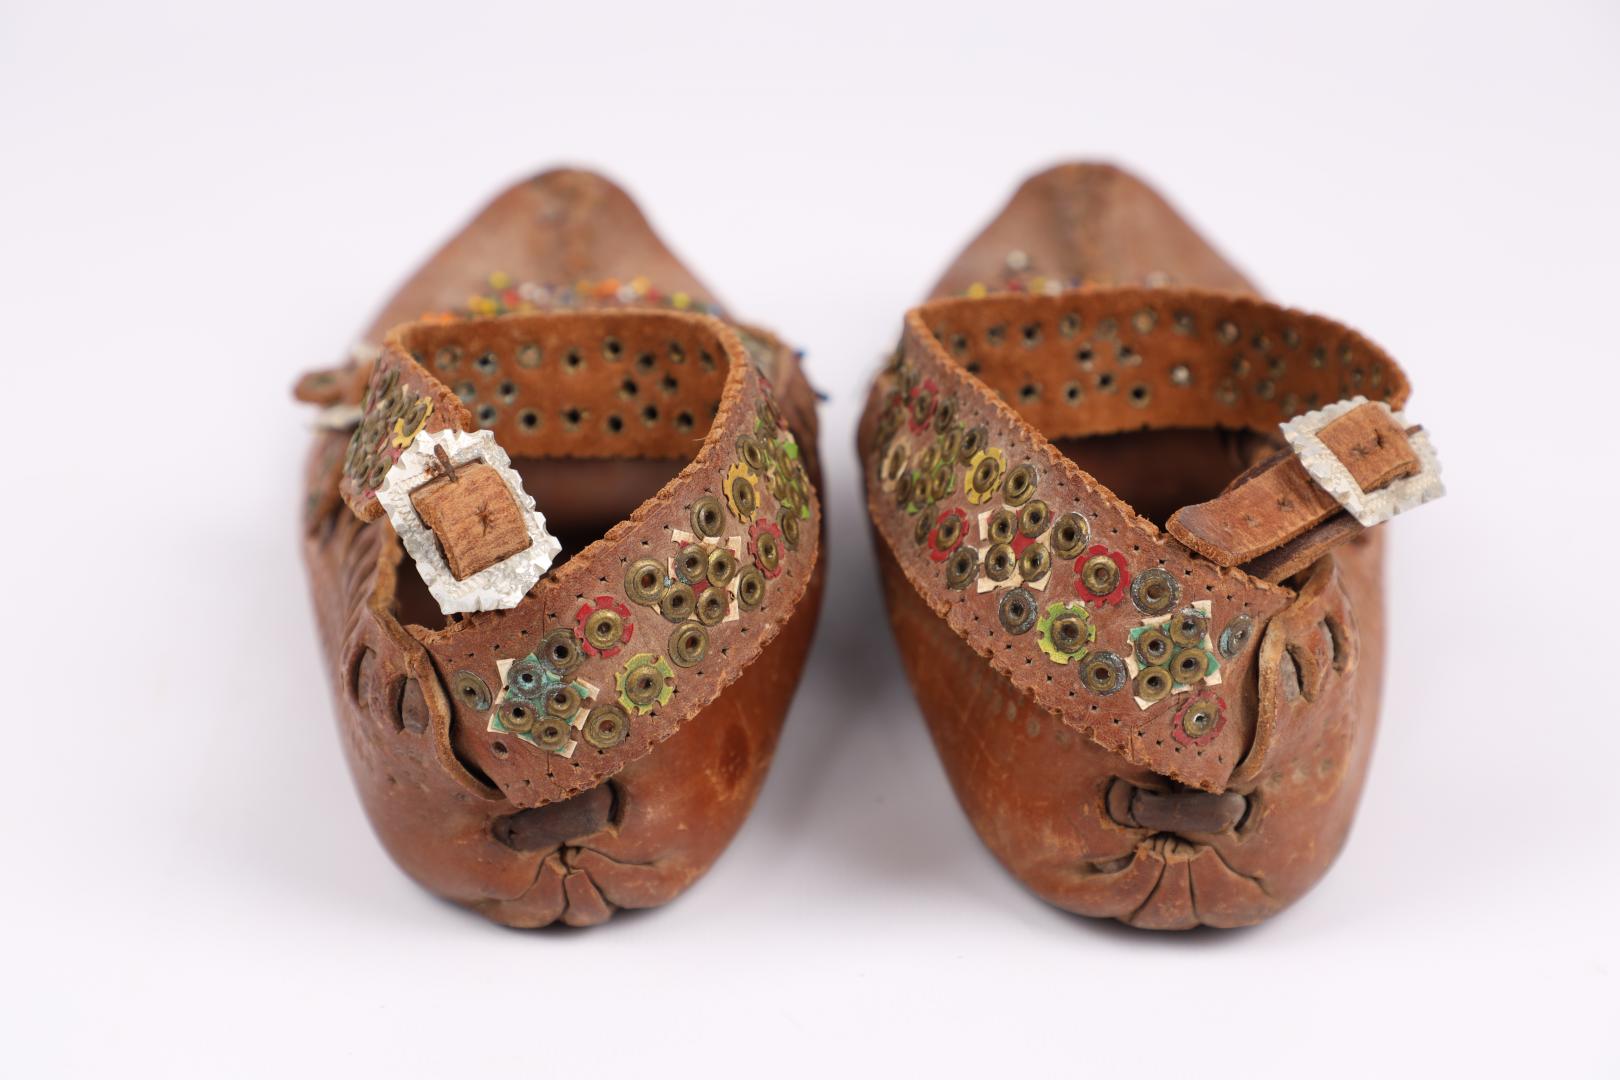 Postoly (women's boots) decorated with beads and sequins